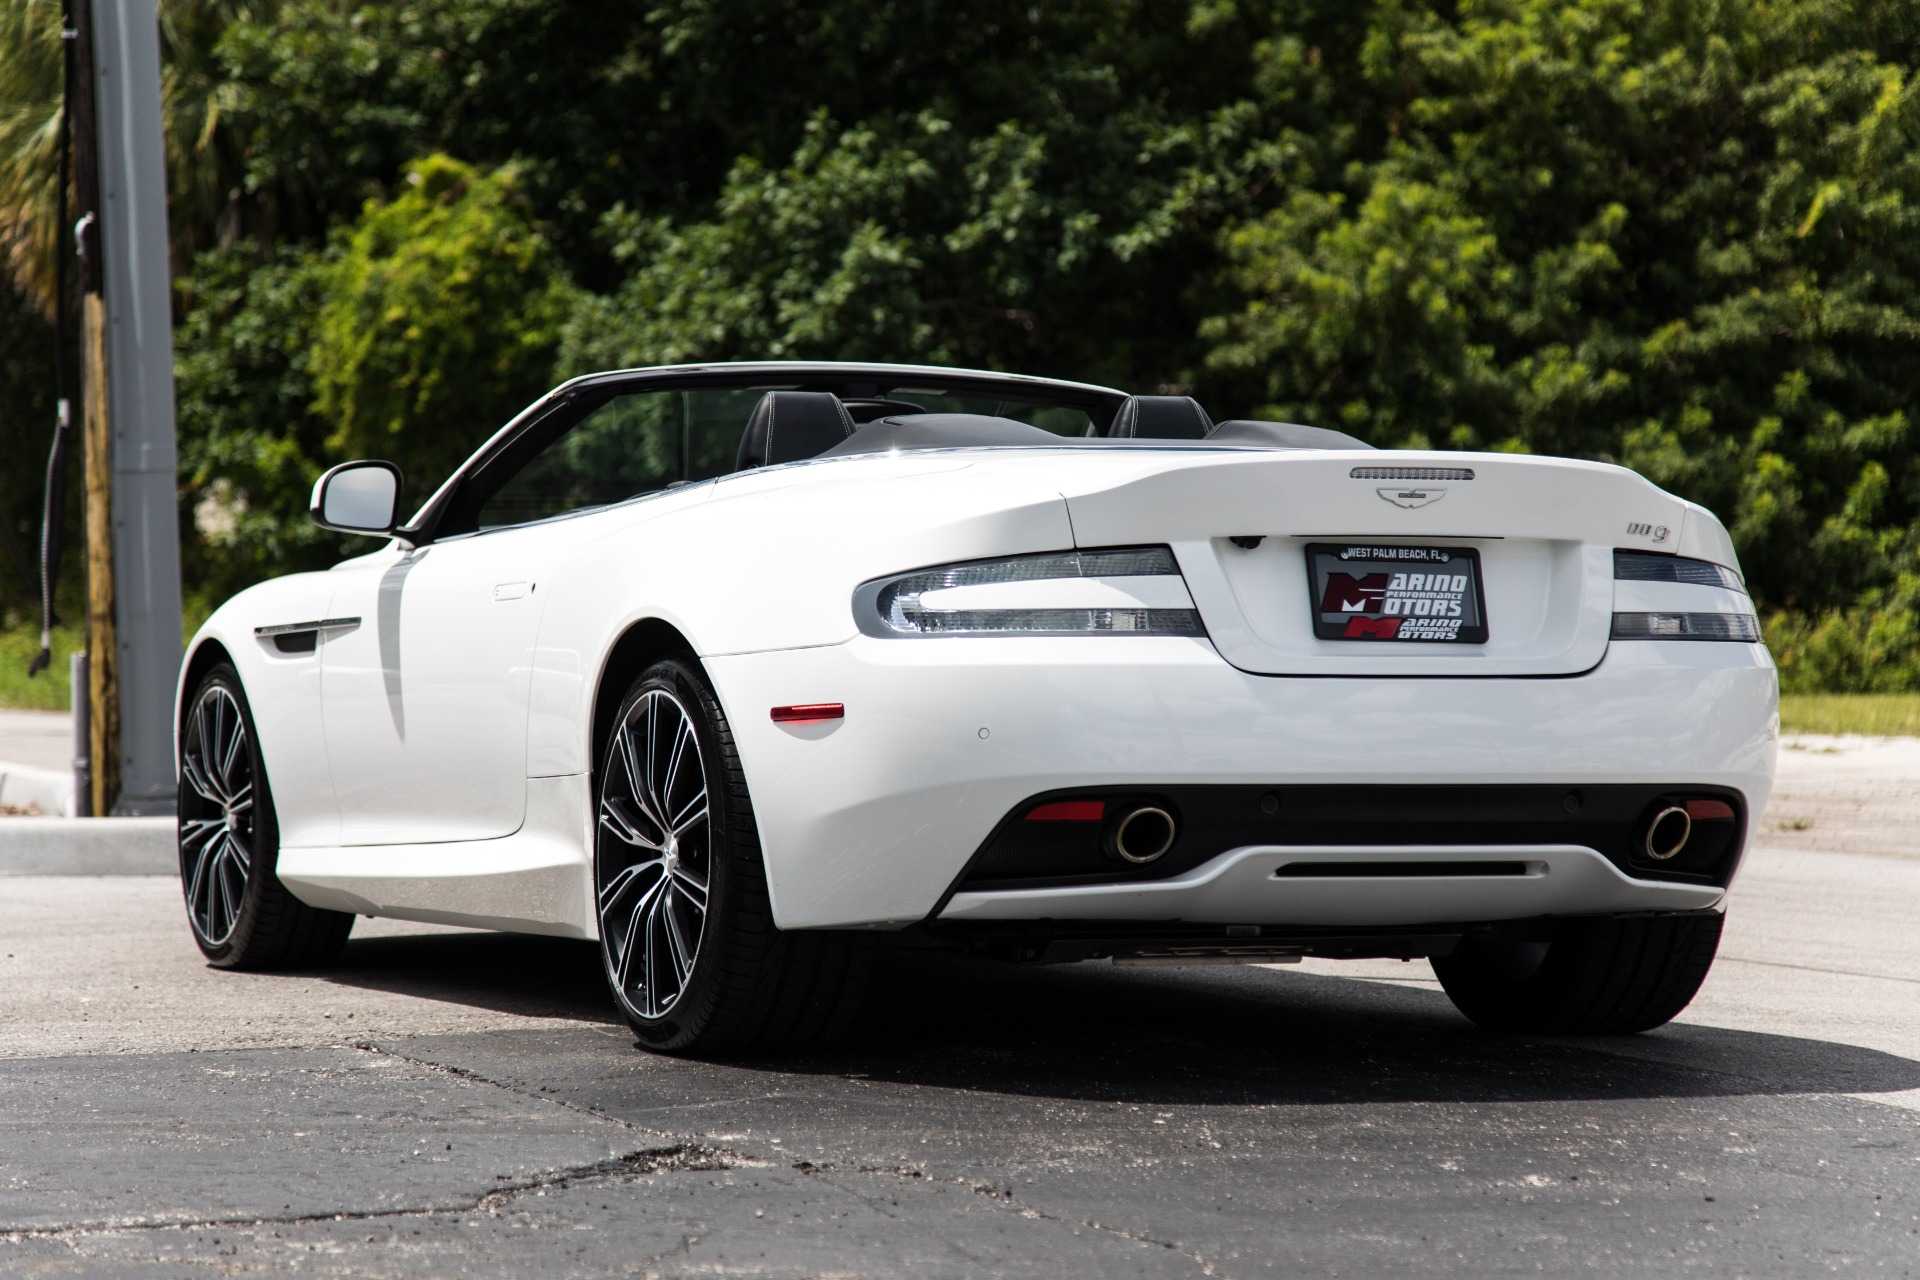 Aston martin db9 tuning, remapping & performance exhausts